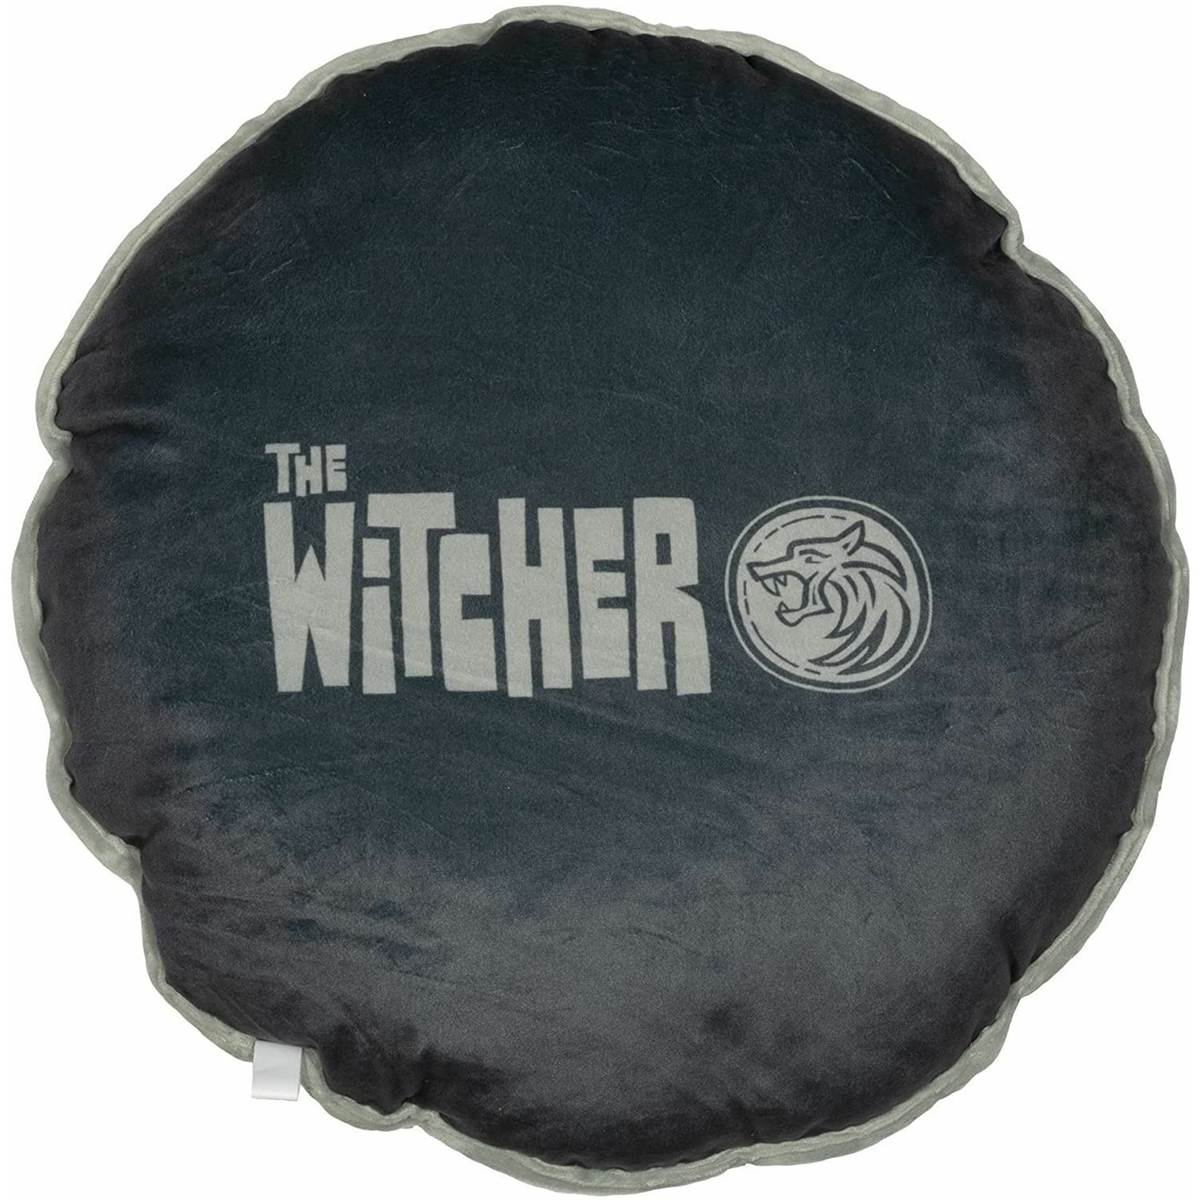 coussin-the-witcher-goodiespop